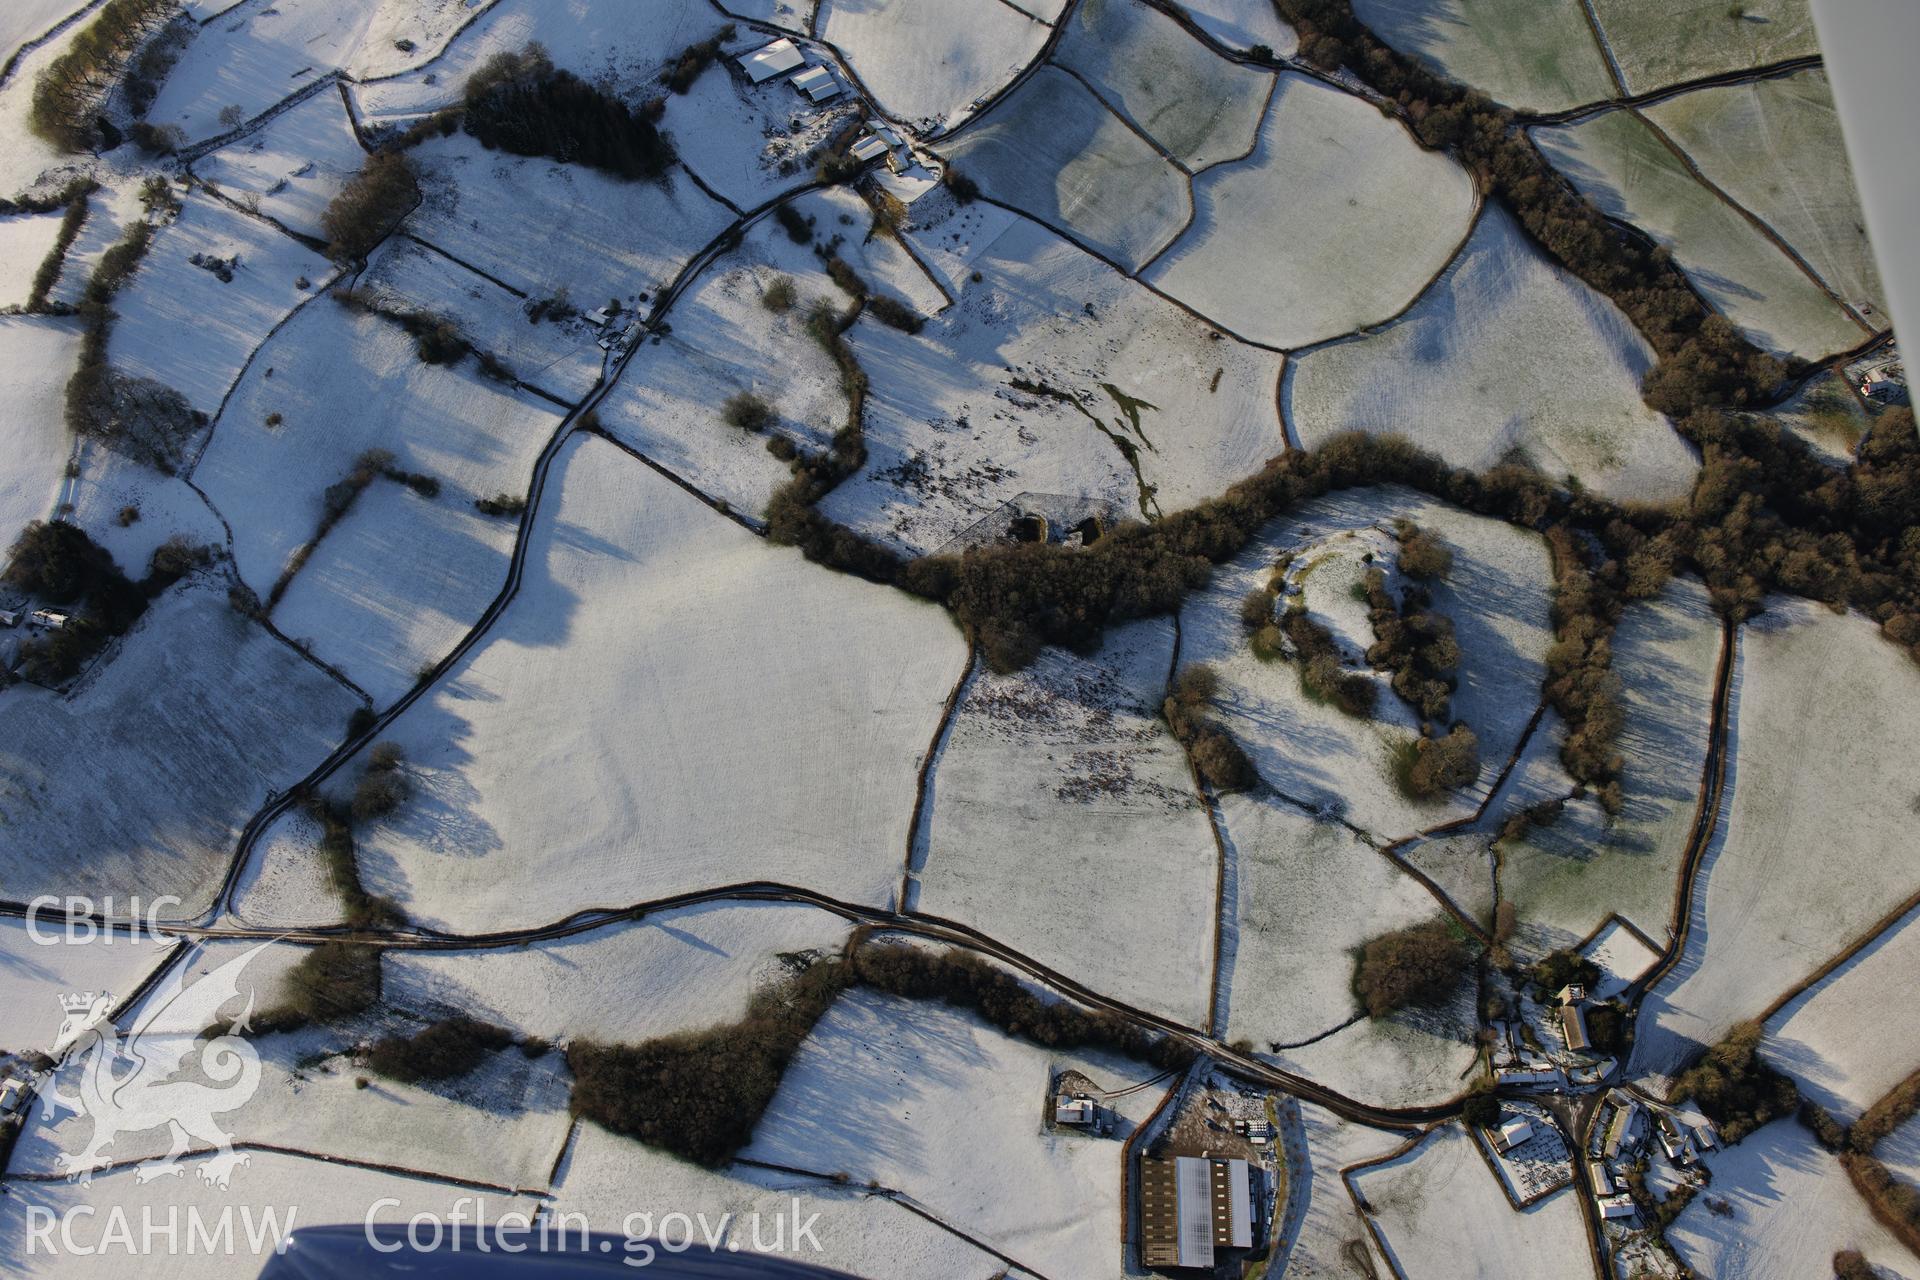 Crickadarn Castle earthworks, south east of Builth Wells. Oblique aerial photograph taken during the Royal Commission?s programme of archaeological aerial reconnaissance by Toby Driver on 15th January 2013.